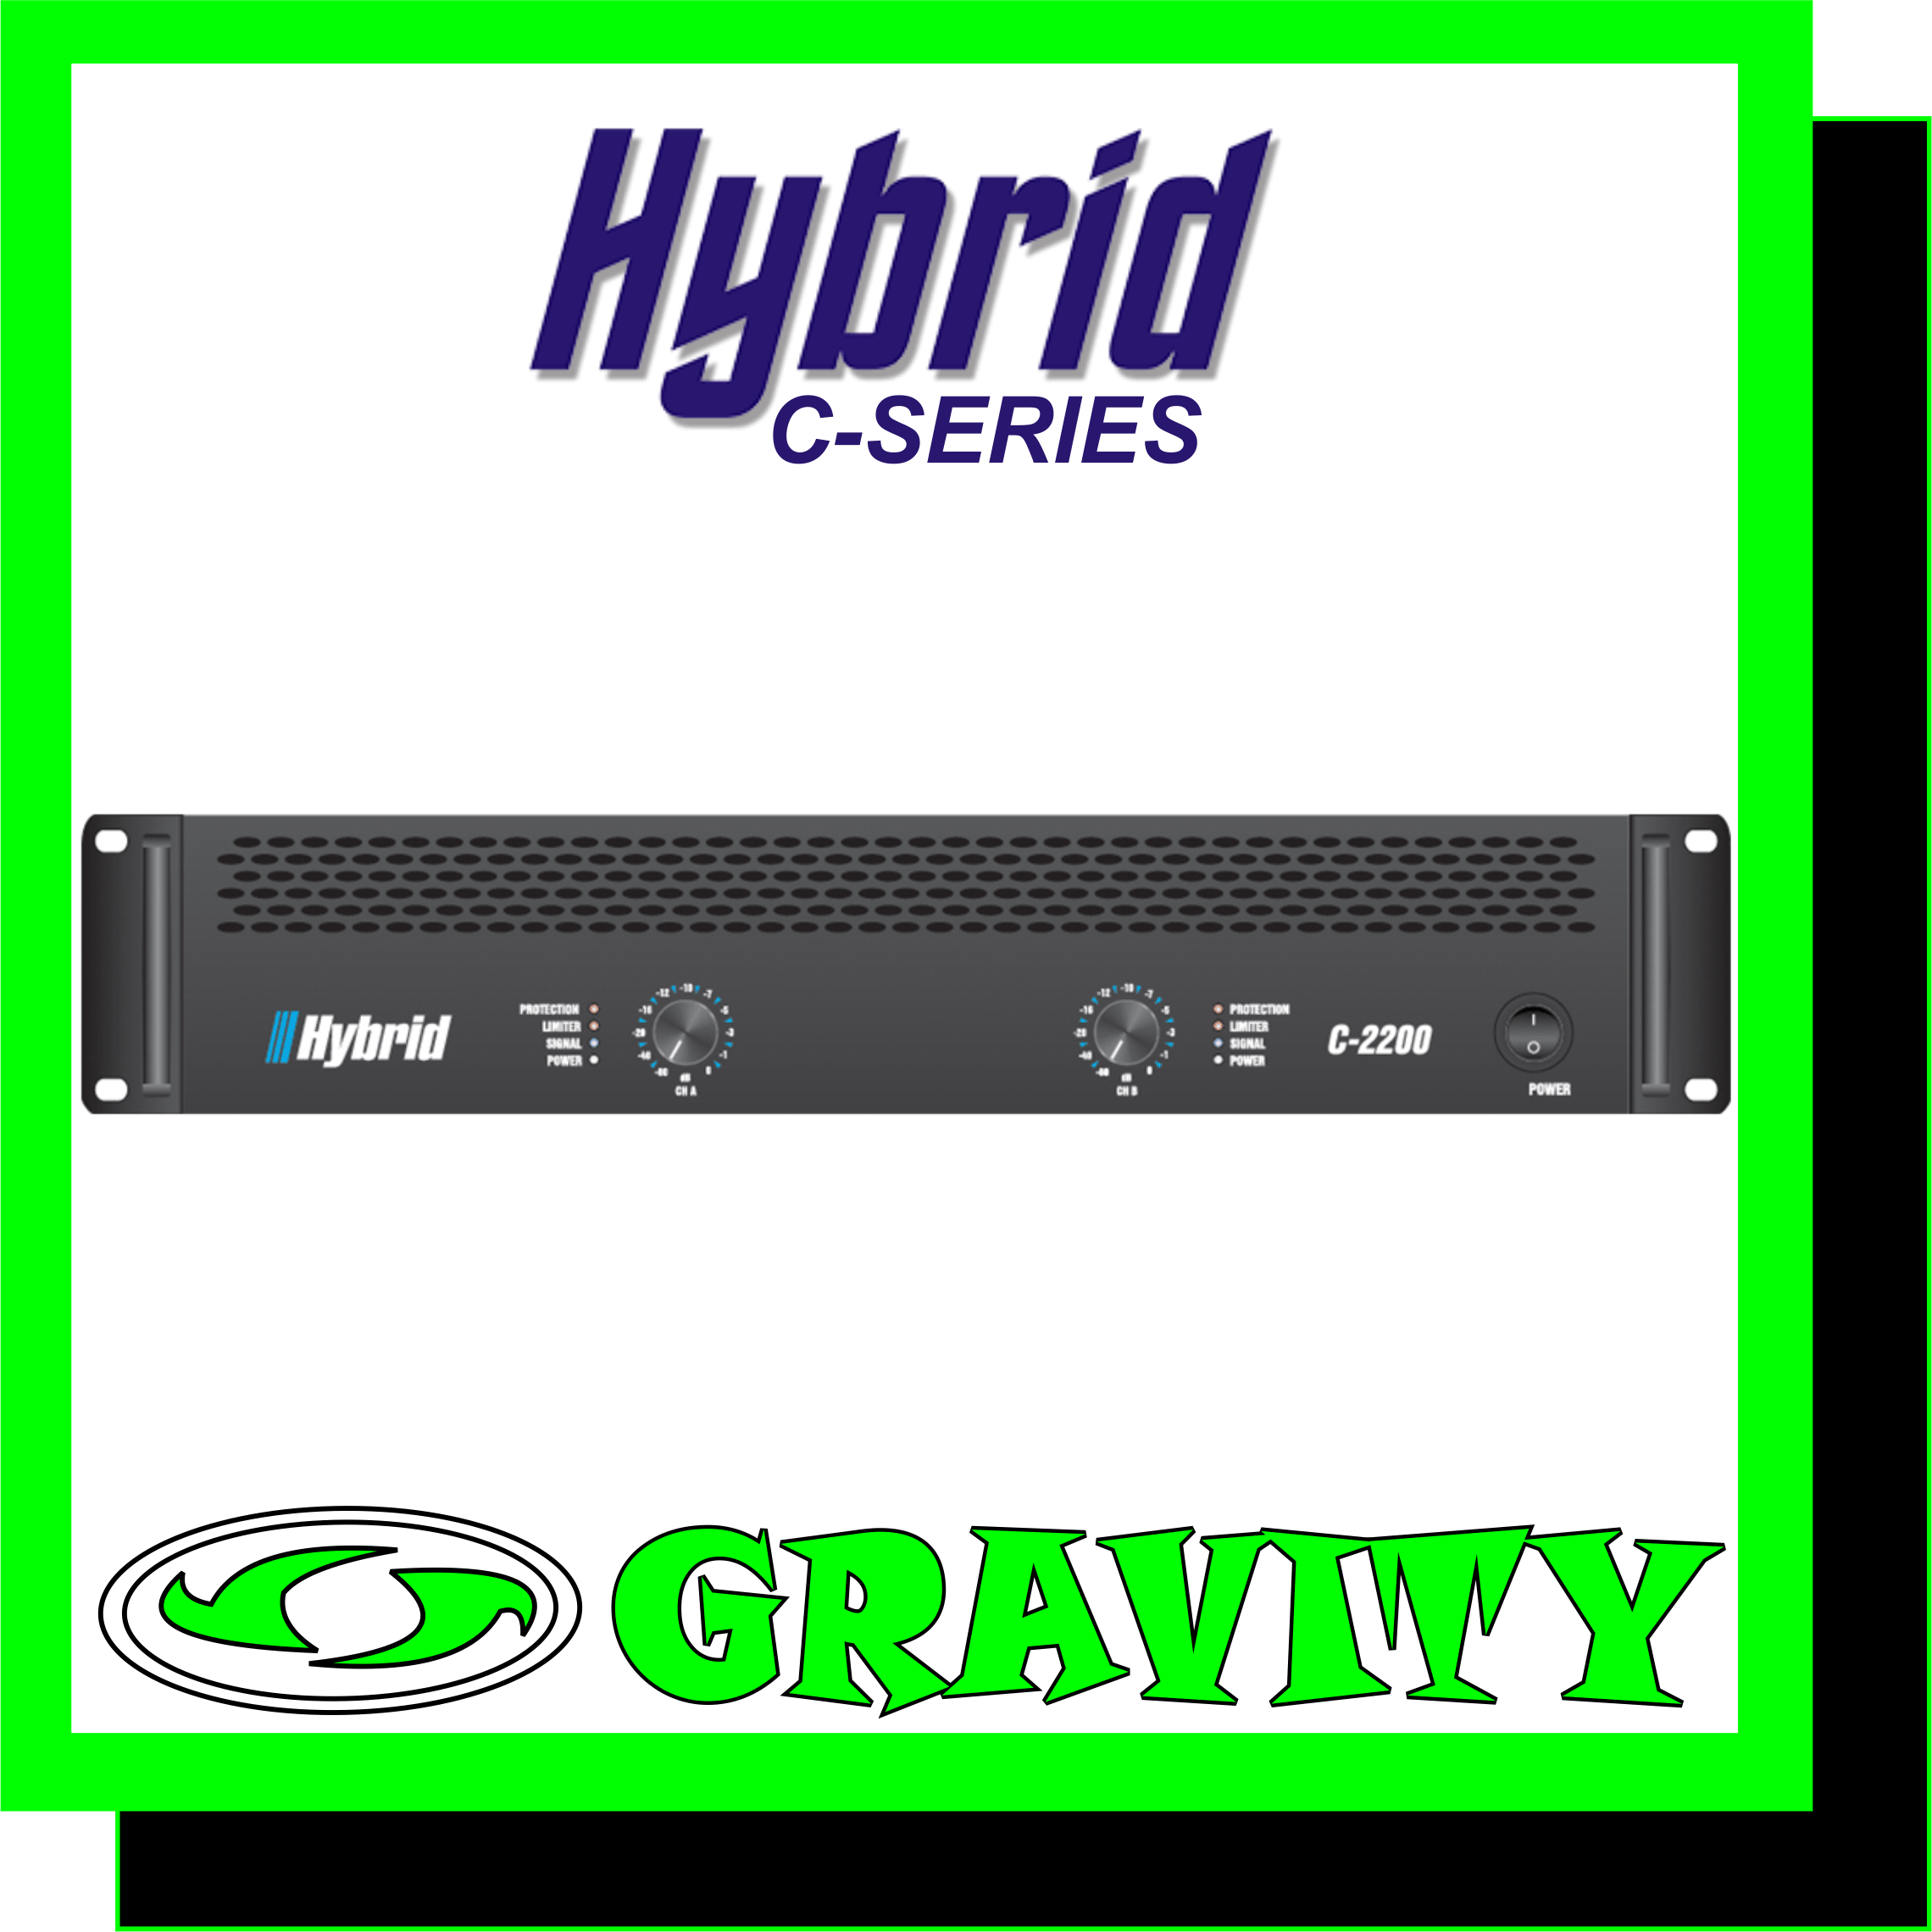 Hybrid C2200MK2 2x1100W Power Amplifier with X-over  8Ohm Stereo Power . RMS/CH 700W 4Ohm Stereo Power . RMS/CH 1100W 8Ohm Bridged Mono Power . RMS 2100W  Frequency Response ( 1W/8O) 20Hz 20KHz +/- 3dB Protection DC Protection . Short Circuit Protection . Thermal Protection . Inrush Current Protection . Soft Start Portection . Input & Overload Protection THD+N (20Hz-20KHz) <0.1% Damping Factor (1KHz @ 8O) >500 Hum & Noise(A weighted . -80dBW) 100dB Input Impedance (Balanced / Unbalanced) 20K Ohm / 10K Ohm Crosstalk (20Hz-20KHz Rated Power 8O) >60dB Cooling 2 x Fans . Dual speed . Front to Rear Airflow  Input Connectors Jack/Female XLR Neutrik Combo + Male XLR Neutrik Output Connectors 3x Neutrik Speakon Dimensions (WxHxD) mm 483 x 88 x 430 Weight Kg 20